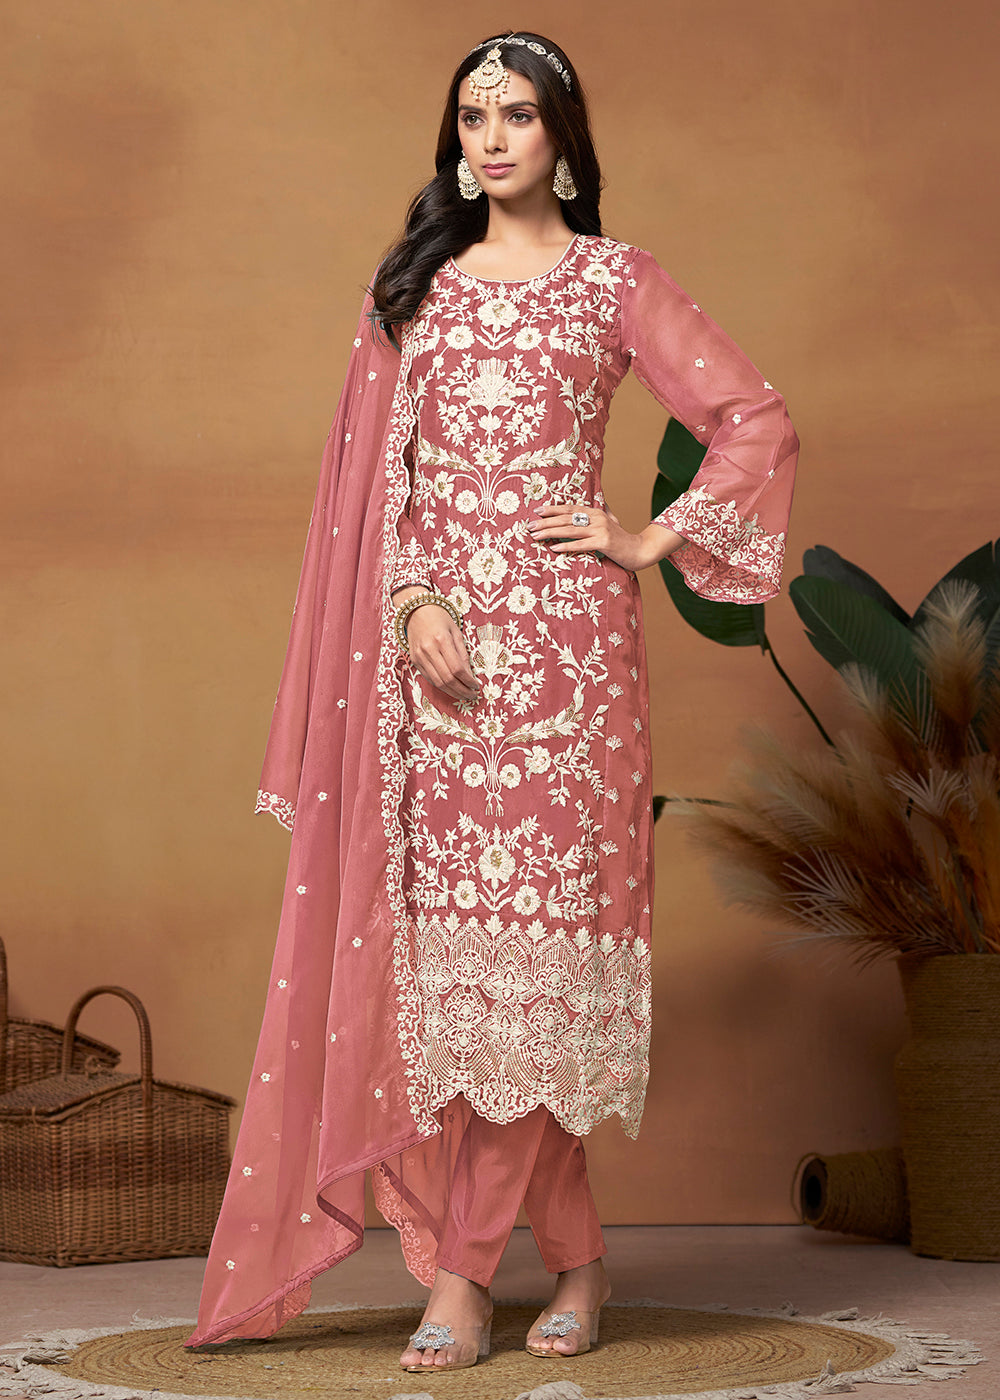 Buy Now Amazing Pink Organza Embroidered Designer Salwar Suit Online in USA, UK, Canada, Germany, Australia & Worldwide at Empress Clothing. 